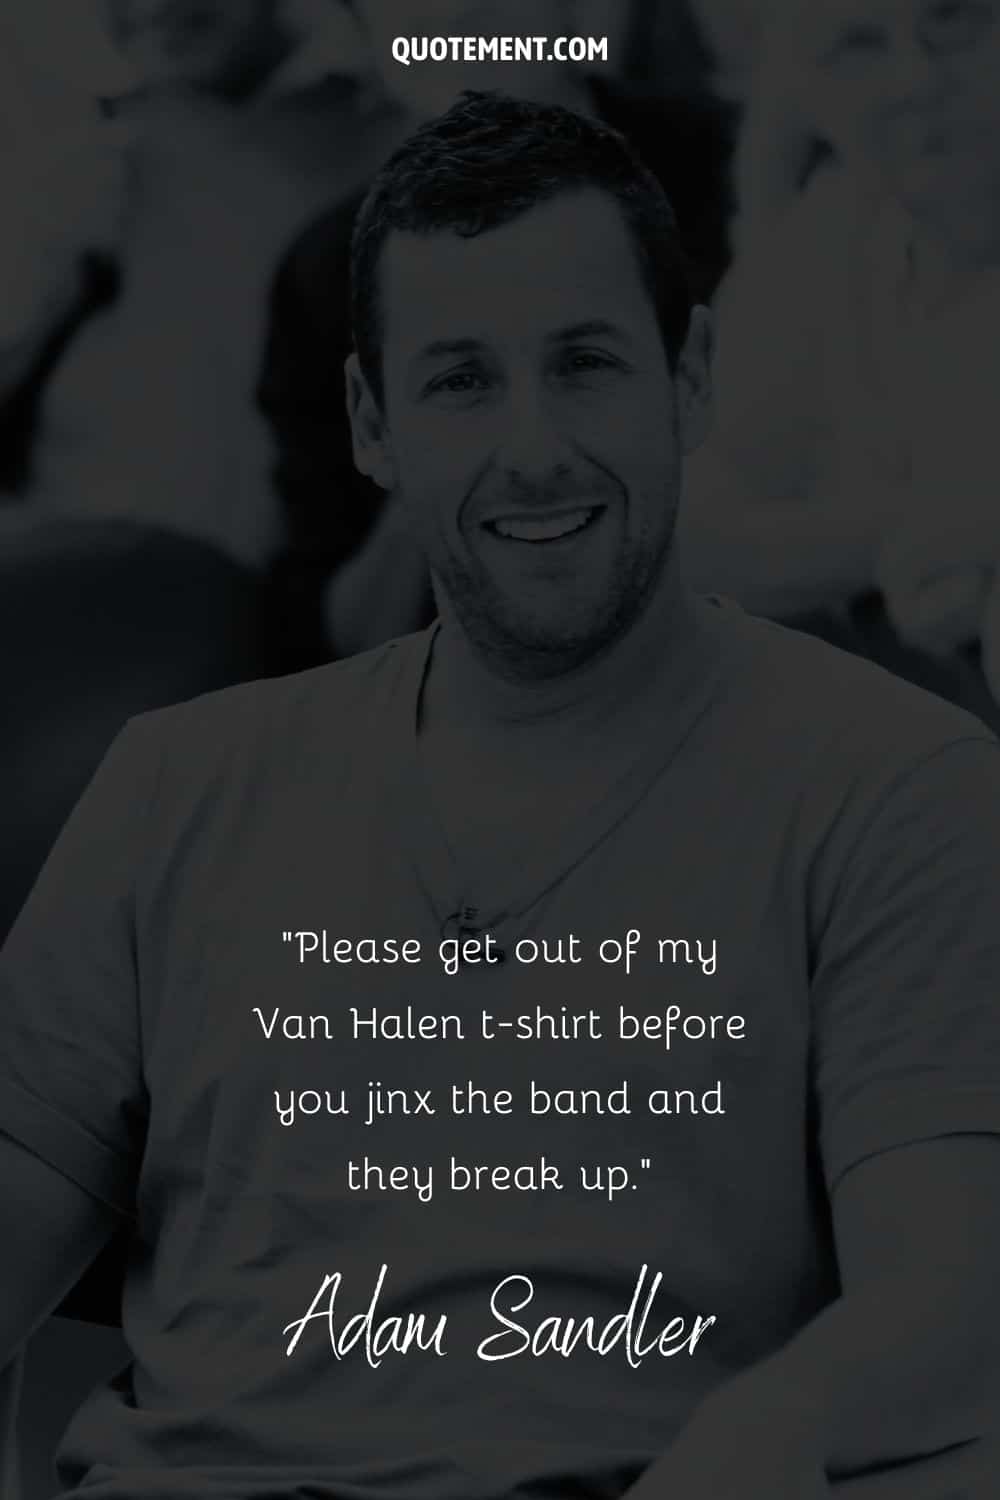 Adam Sandler image with a funny quote from Wedding Singer